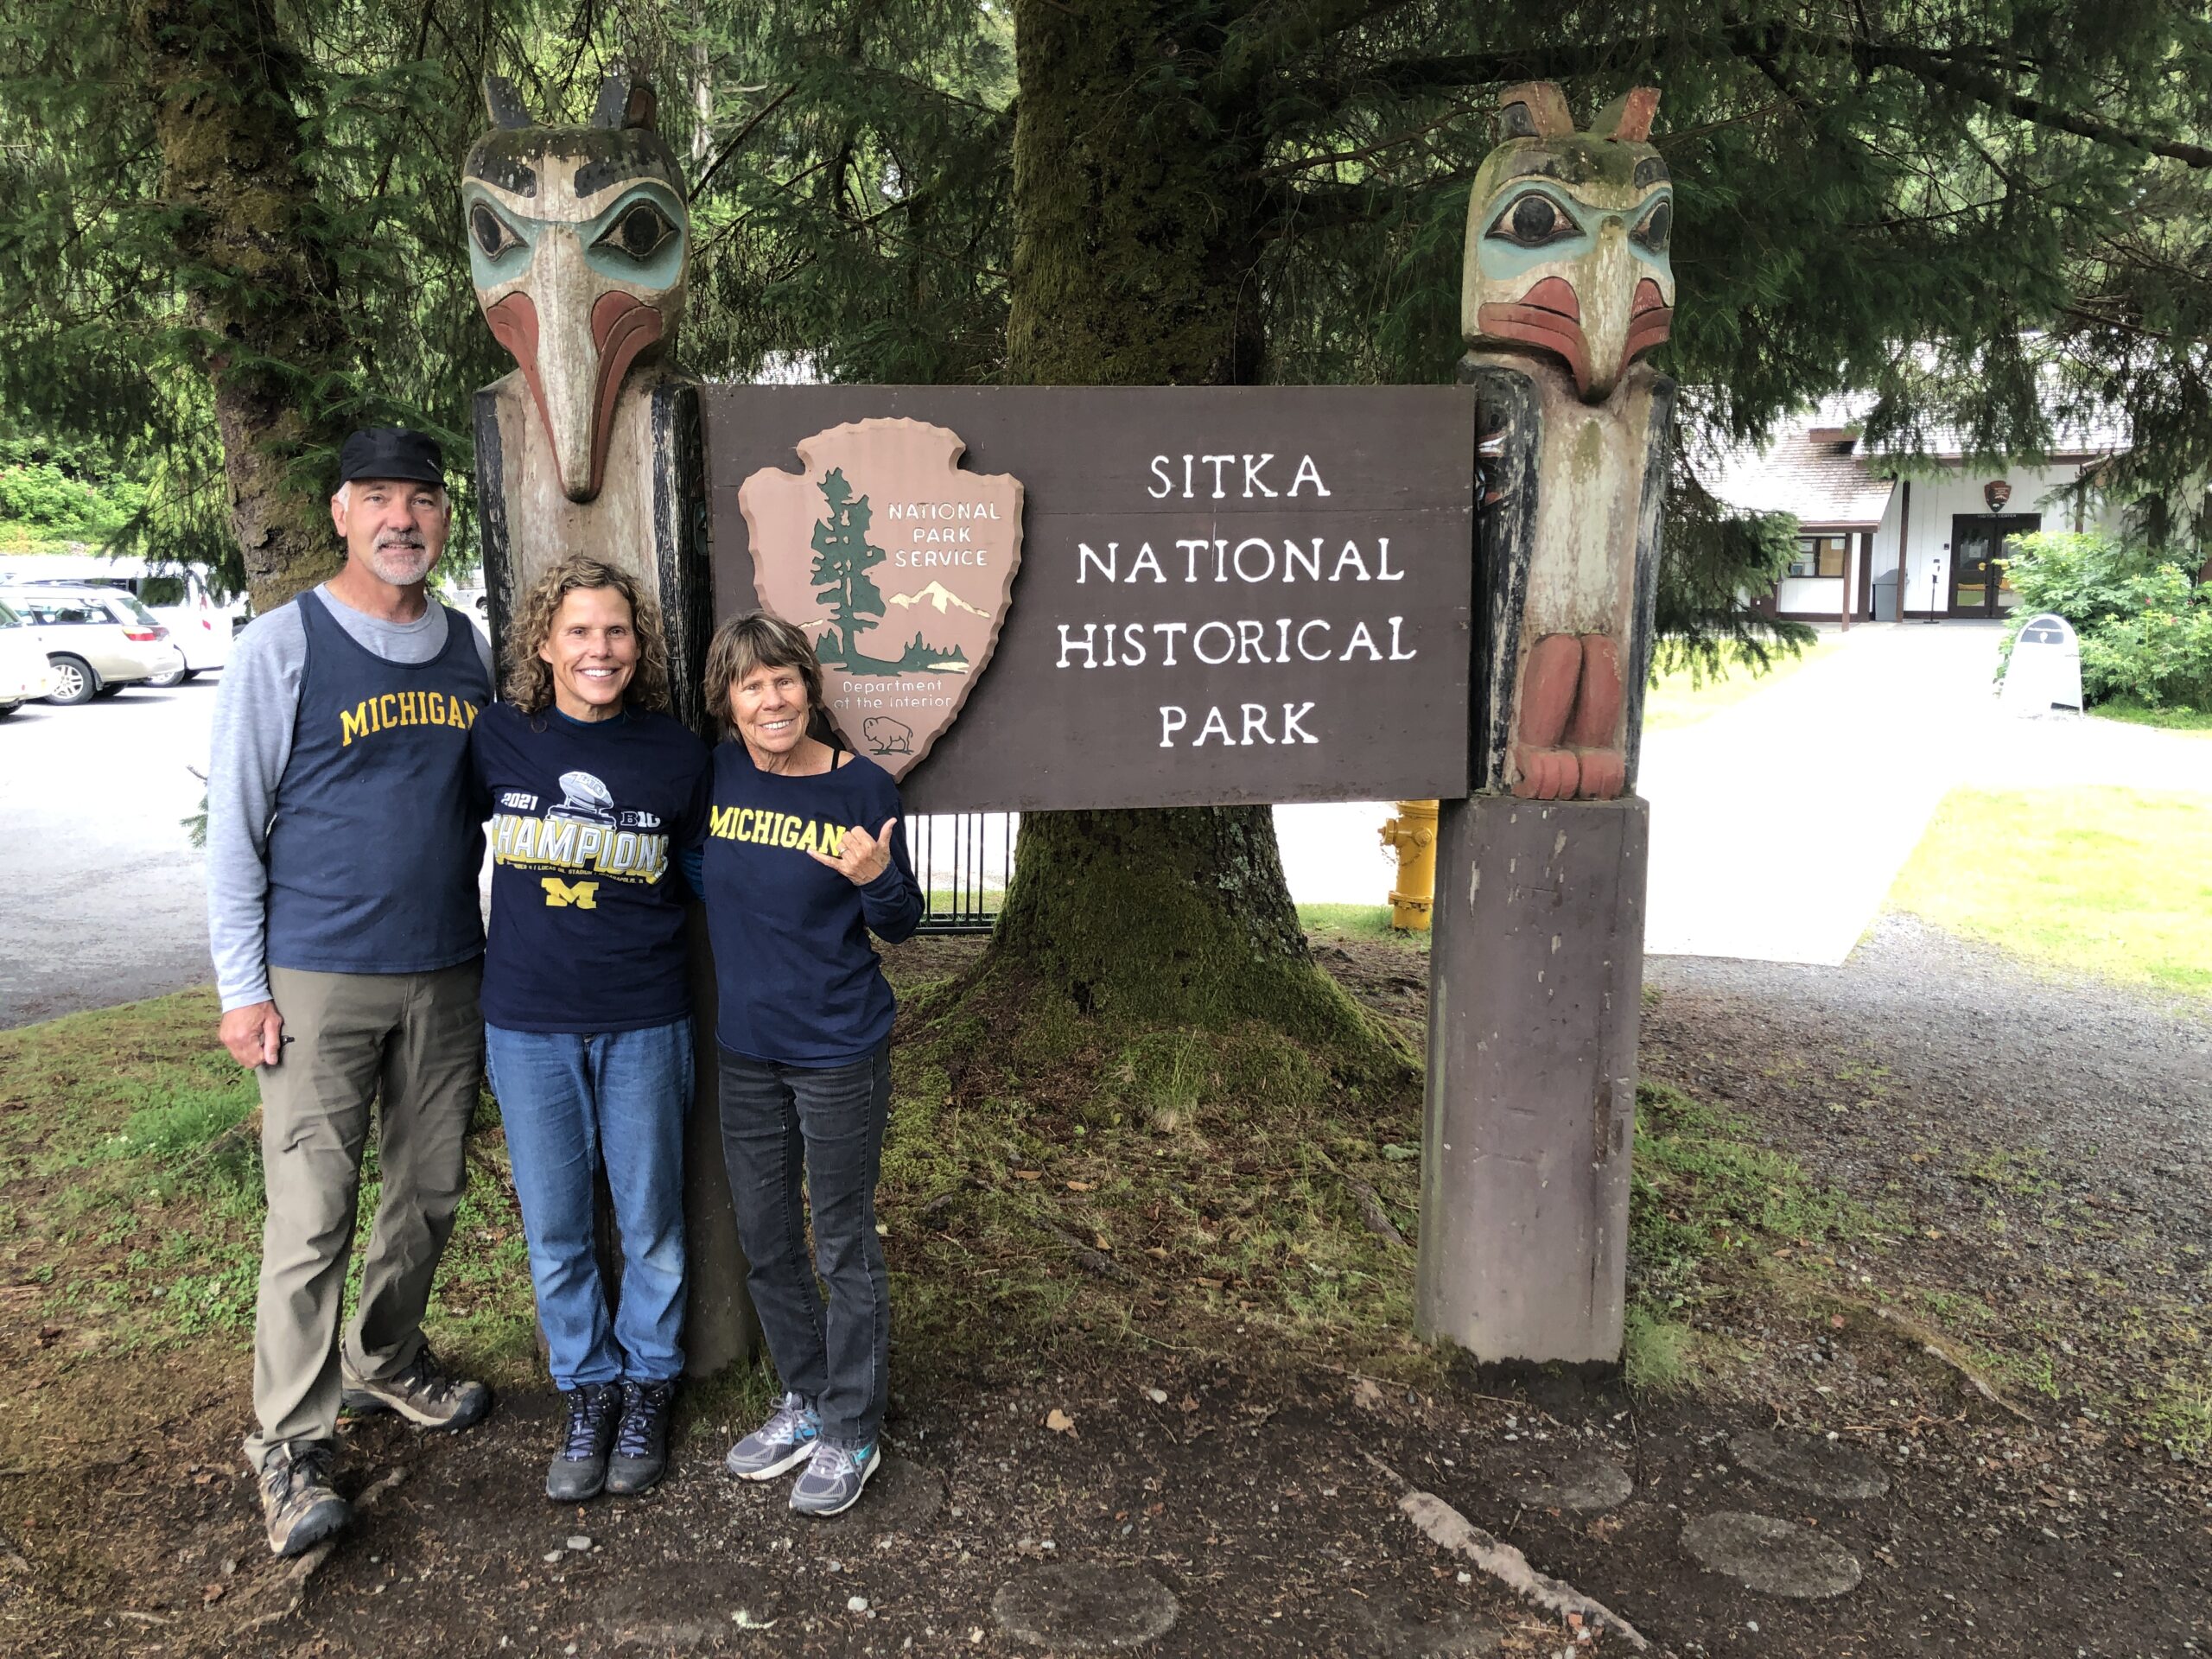 Last year, John, ’84, and Geralyn Doskoch, MD’88 (center), revisited Sitka, Alaska, their home from 1991-95. They were joined by Geralyn’s mother, Gail Nagasako, ’65, and Jordan, Gail’s husband, who is behind the camera.